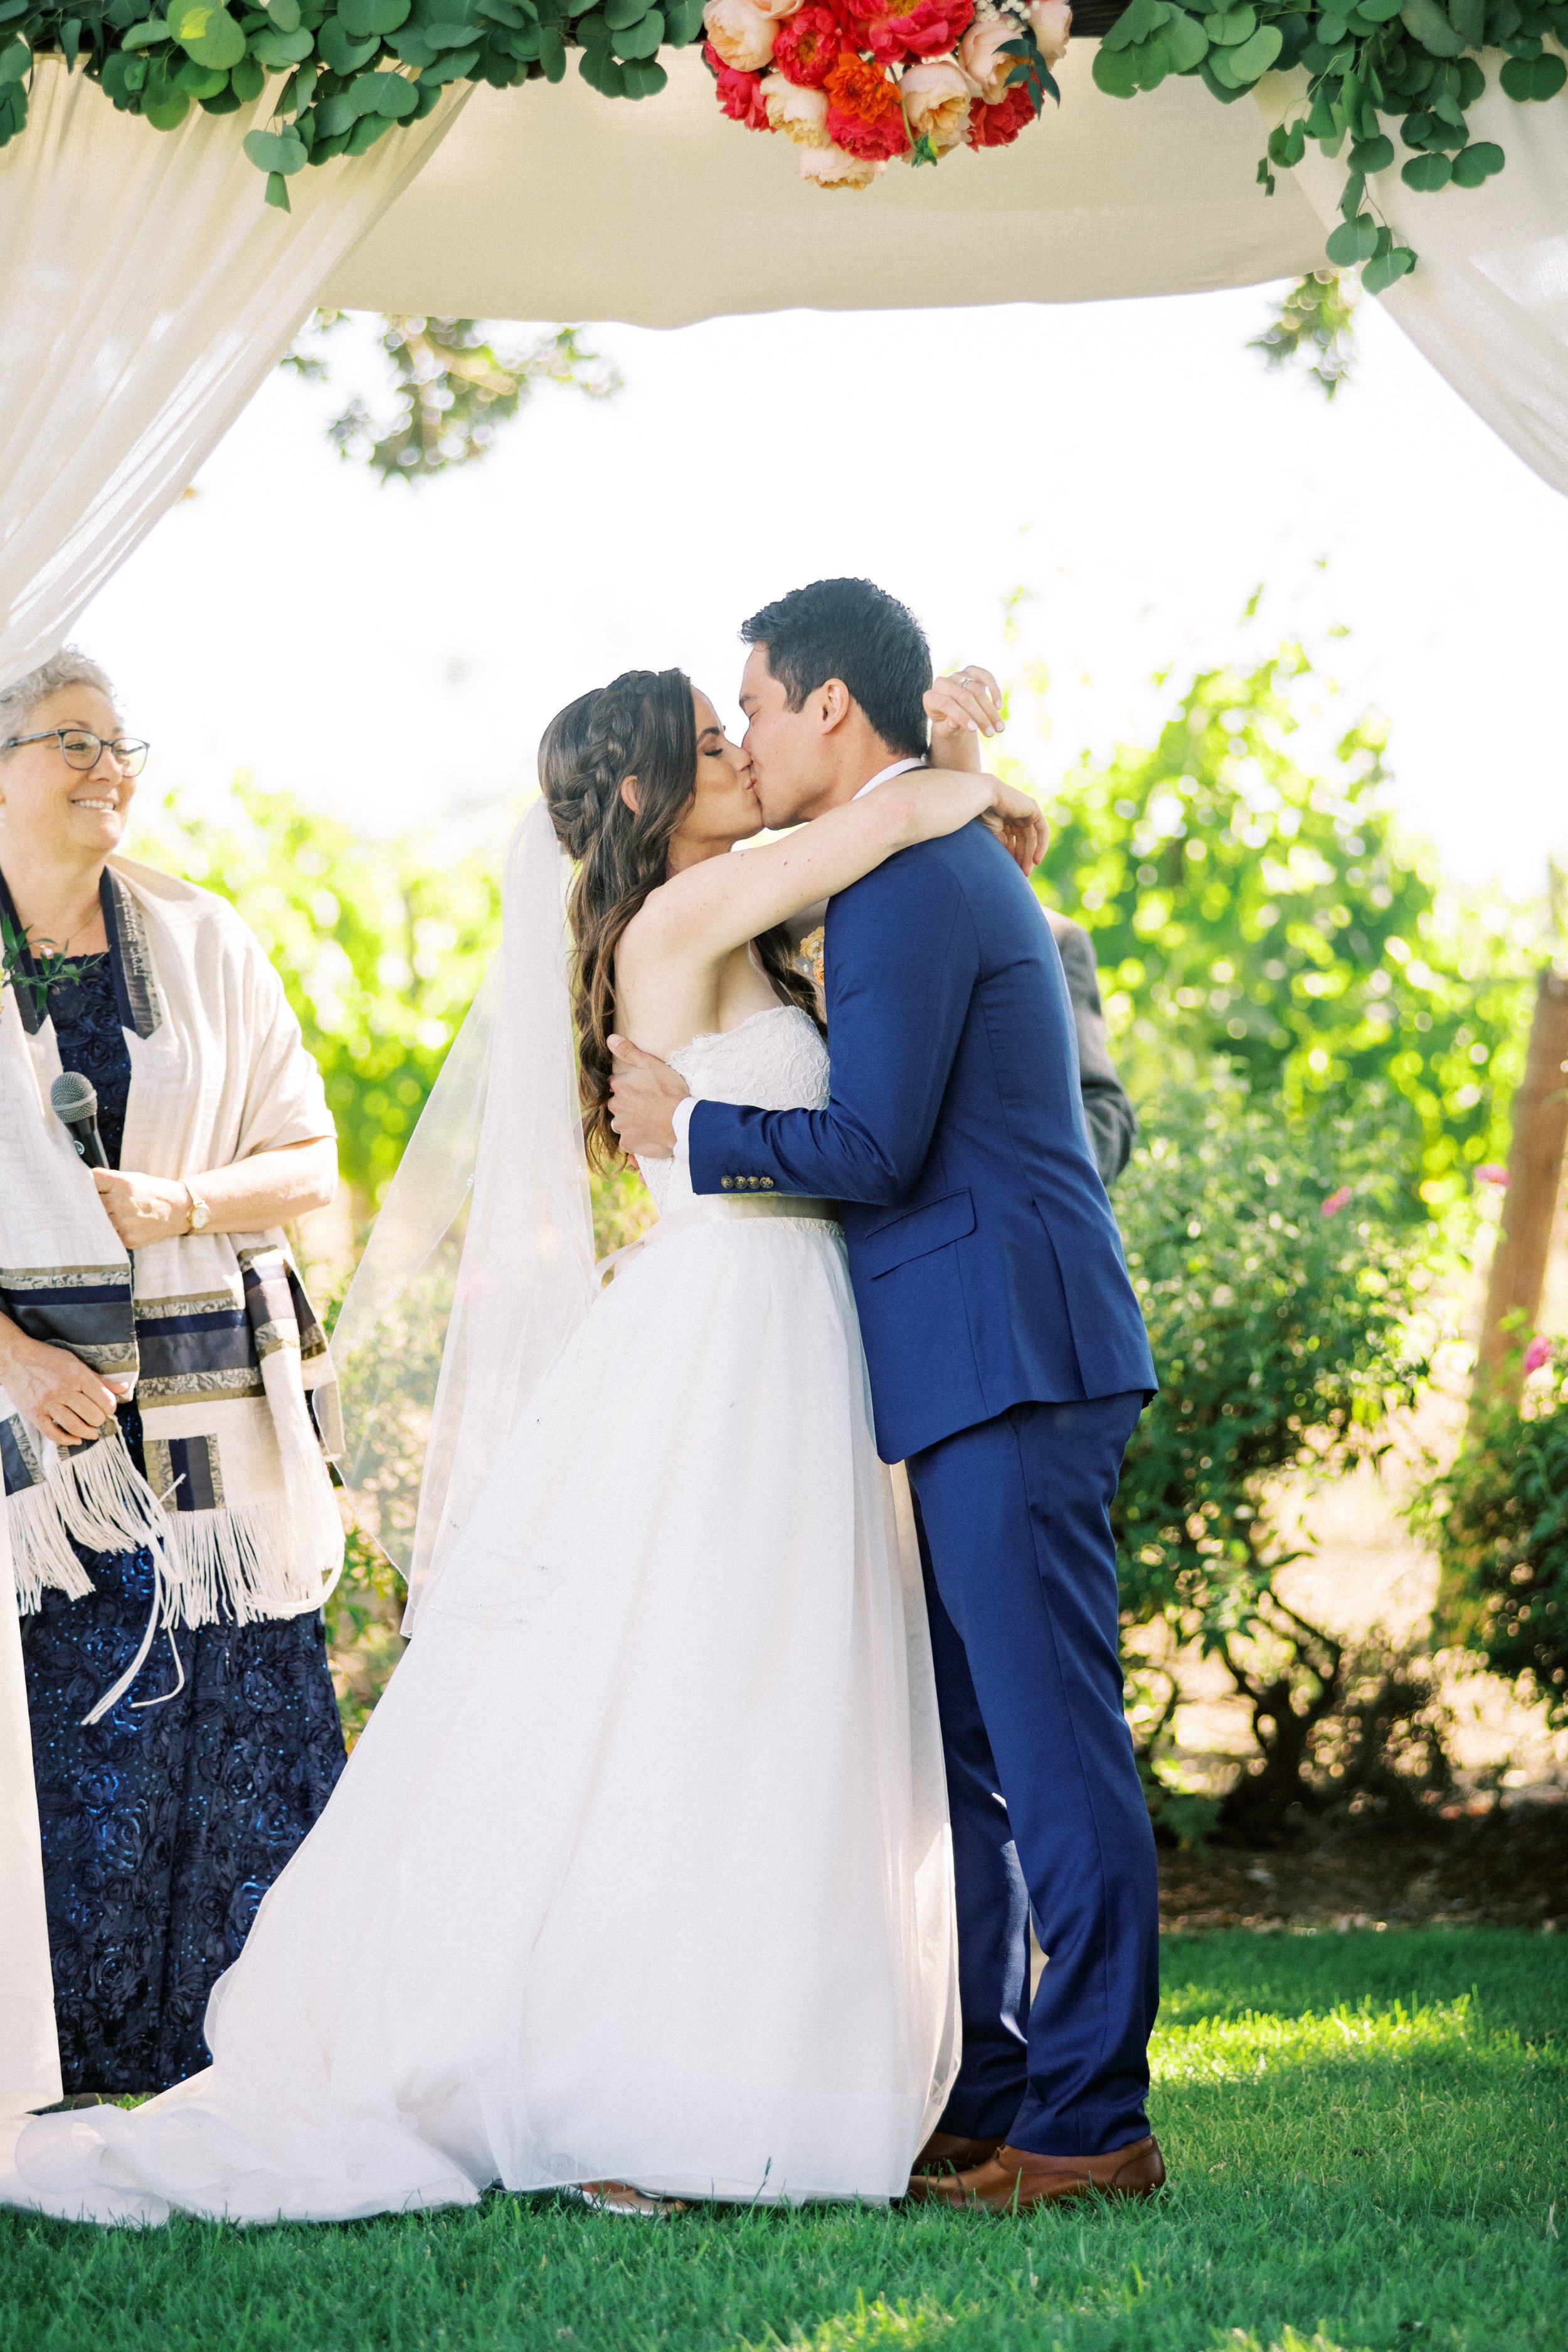 www.santabarbarawedding.com | Loveridge Photography | Gainey Vineyard | Amber Alyse Events | Rabbi Janice Mehring | Lucky Devils Band | Couple Shares Their First Kiss 